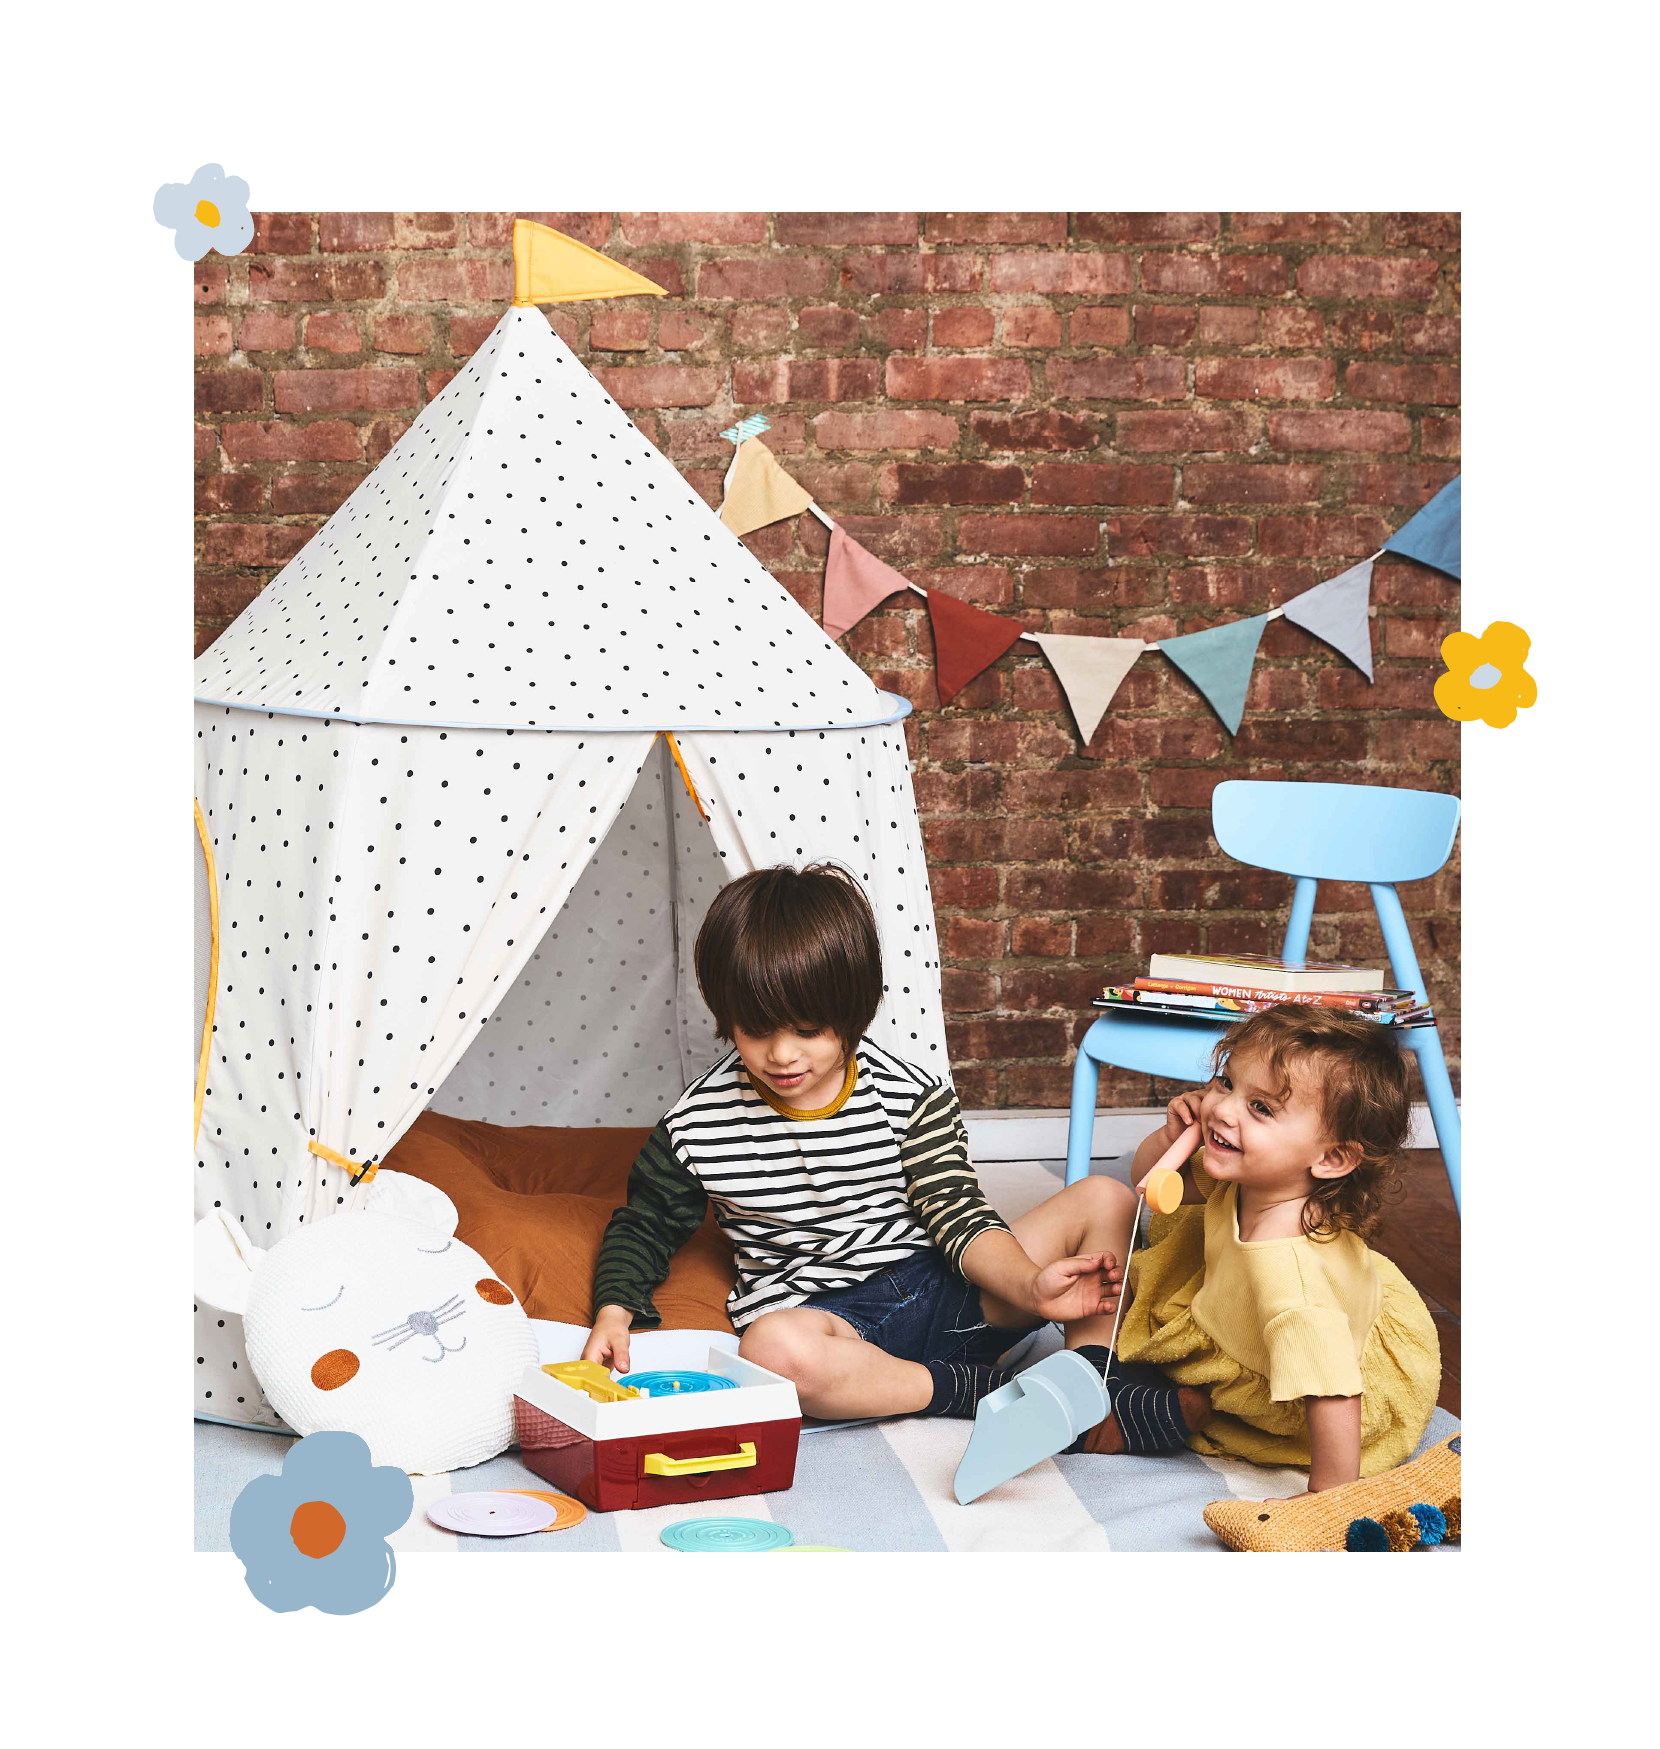 polka dot tent with two kids a little boy and girl playing in front with vintage toys